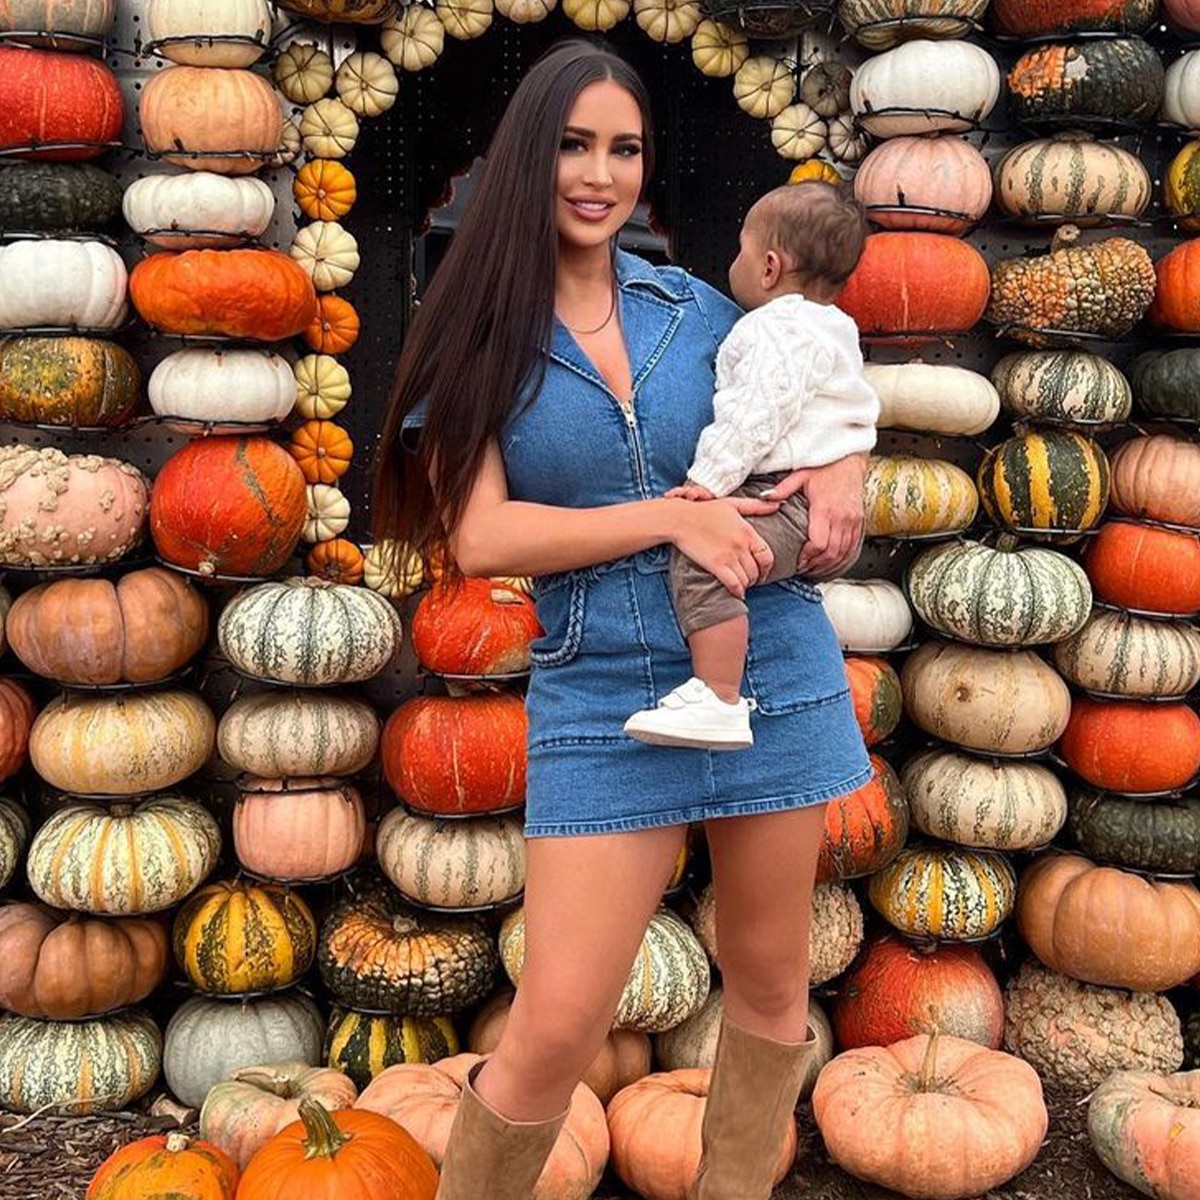 Maralee Nichols Shares New Photos of Tristan Thompson's Son Theo